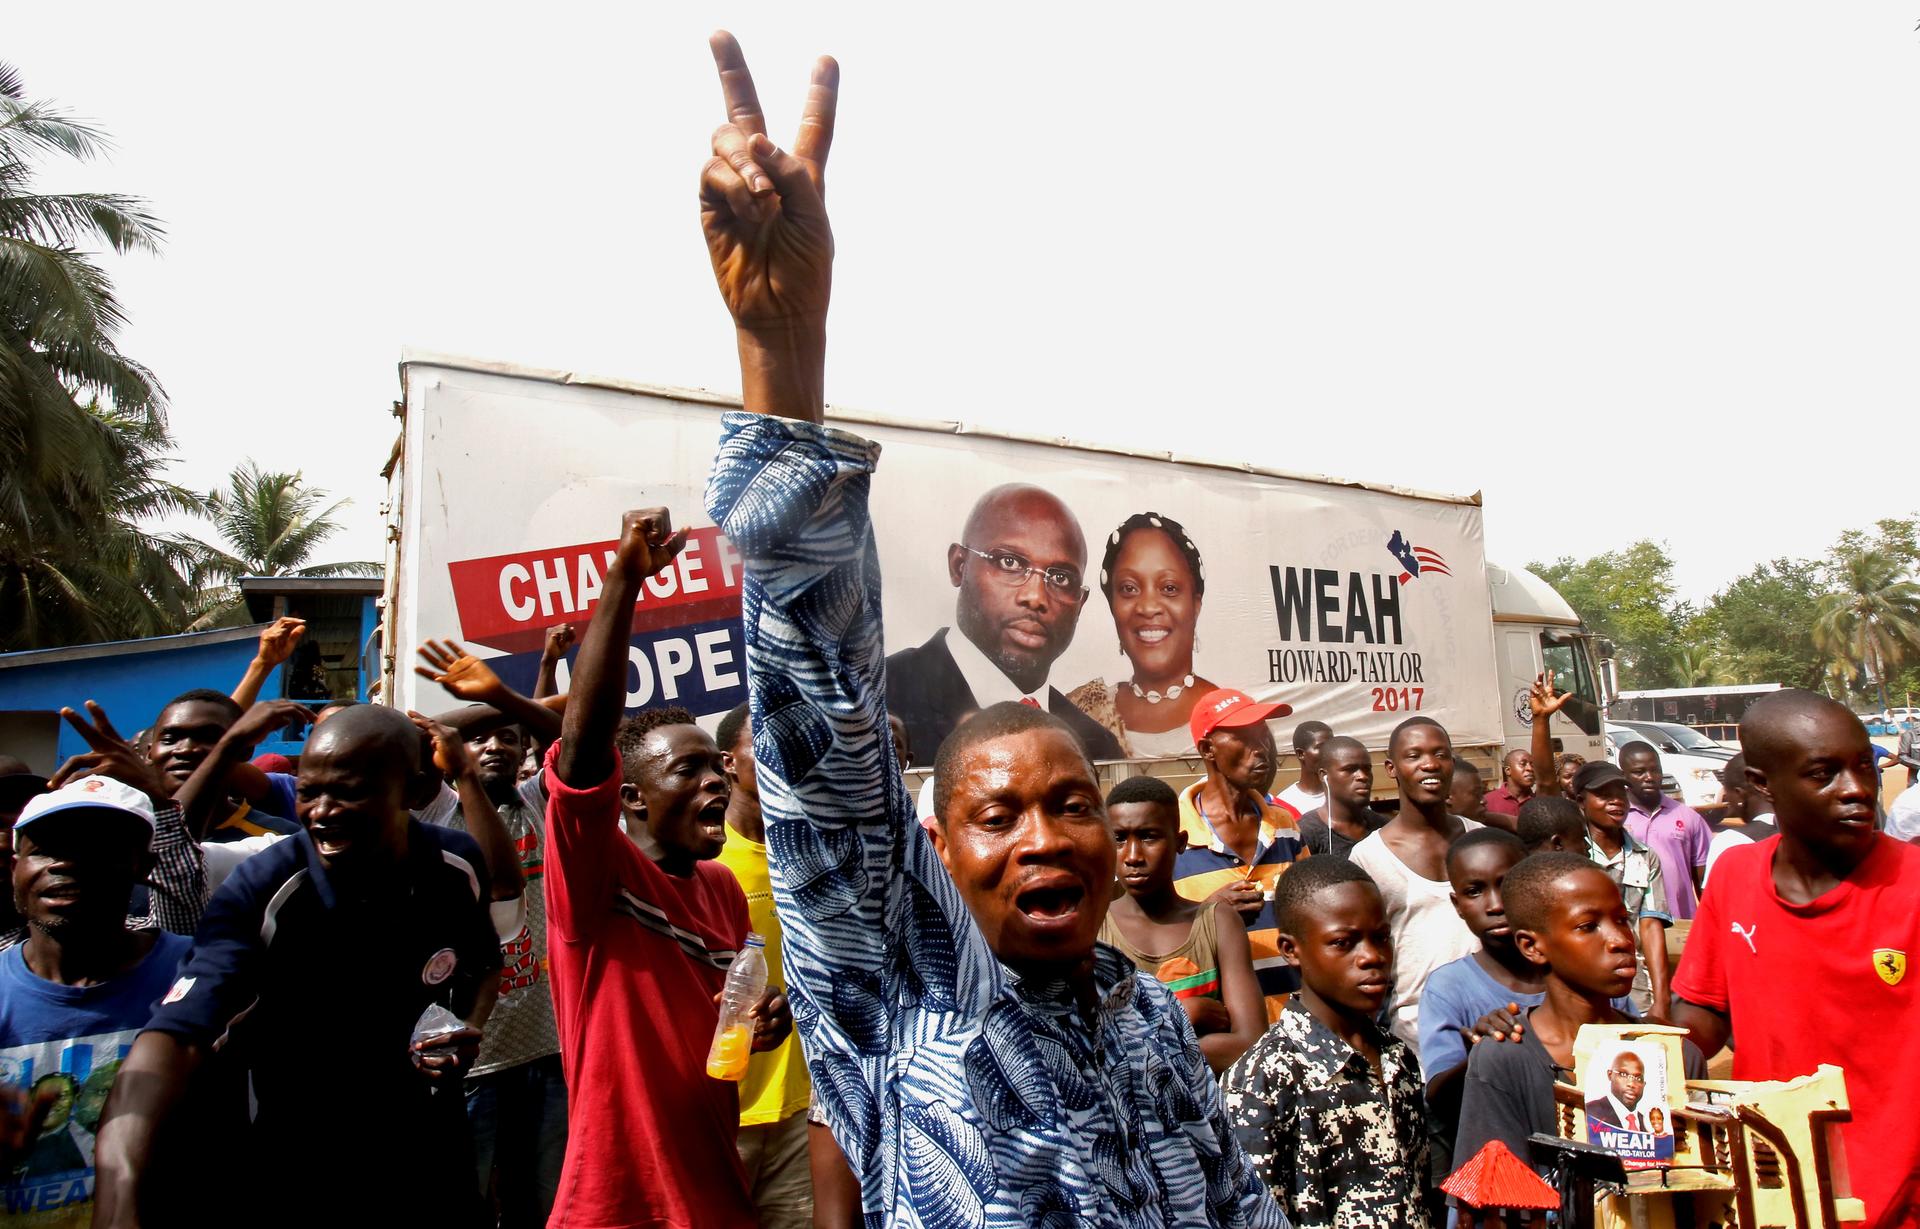 Supporters of George Weah, former soccer player and presidential candidate of Coalition for Democratic Change (CDC), celebrate after the announcement of the presidential election results in Monrovia, Liberia